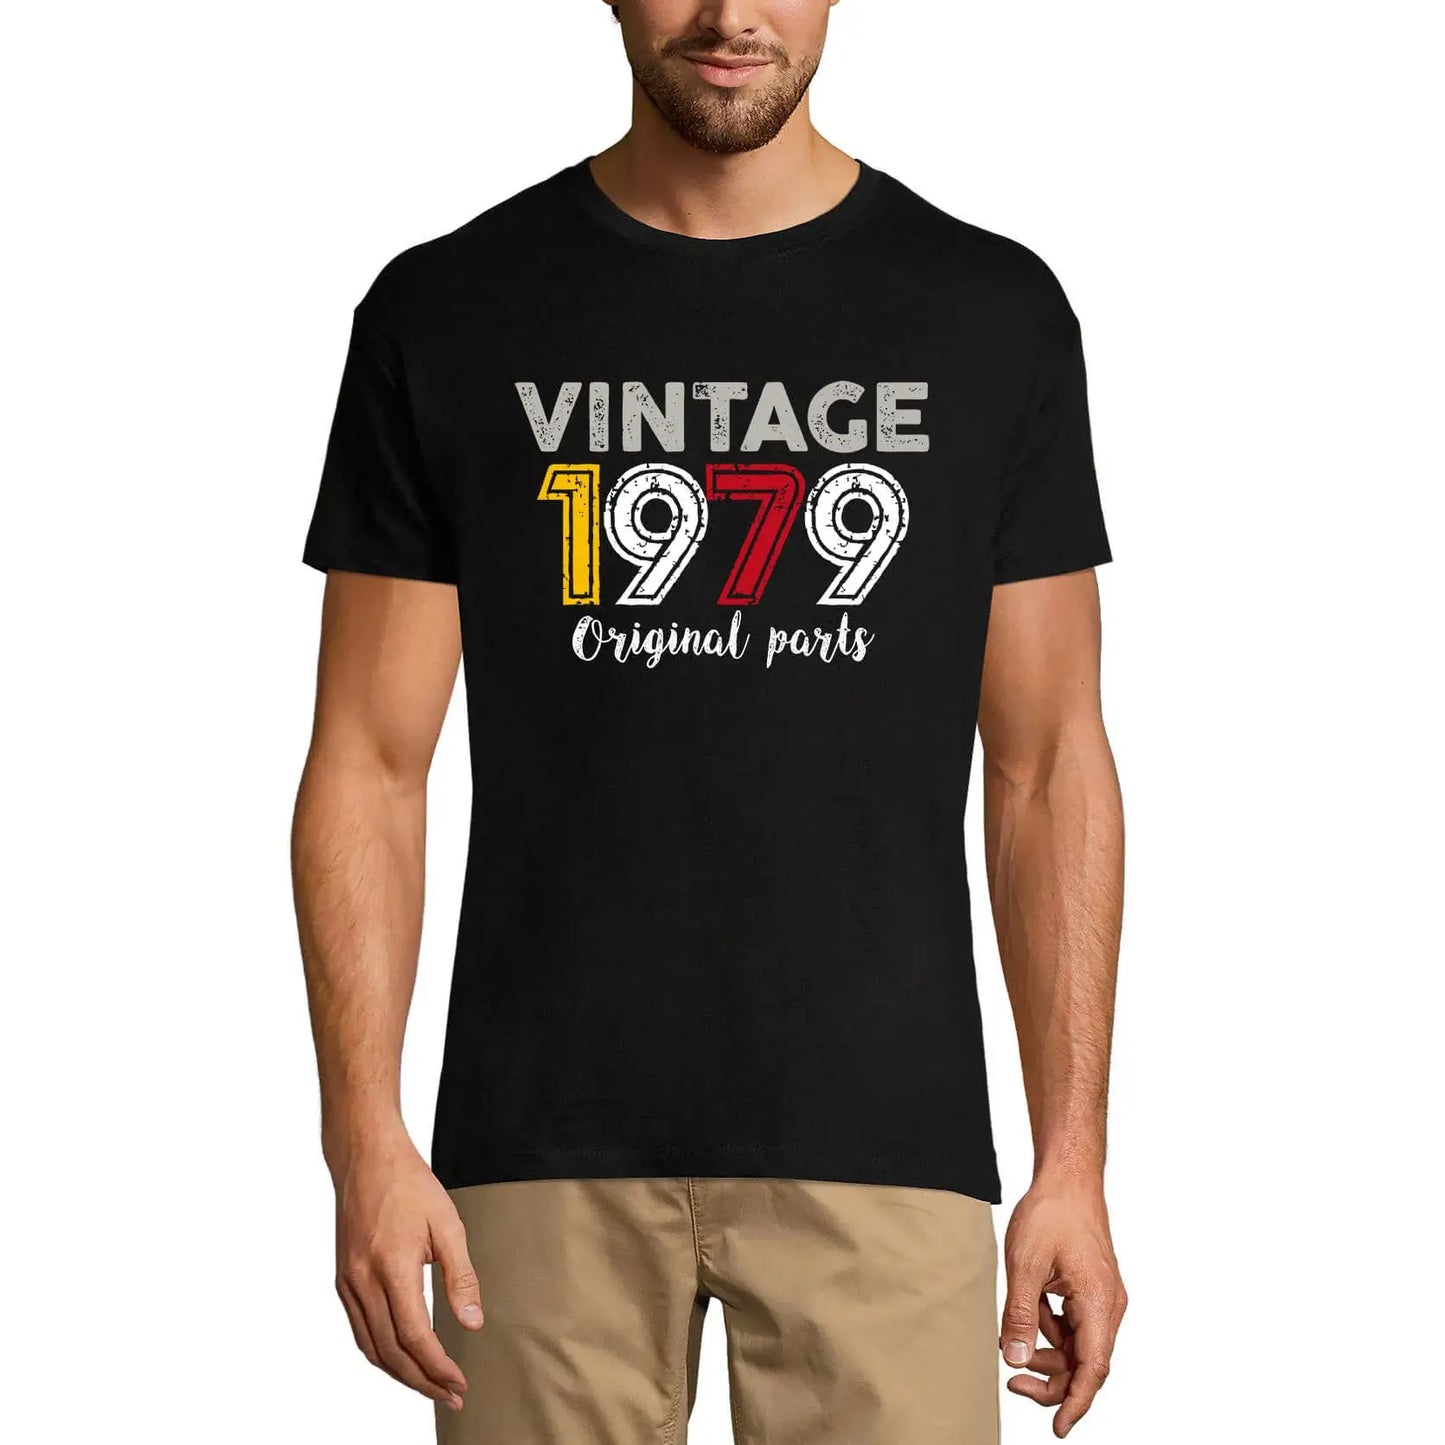 Men's Graphic T-Shirt Original Parts 1979 45th Birthday Anniversary 45 Year Old Gift 1979 Vintage Eco-Friendly Short Sleeve Novelty Tee